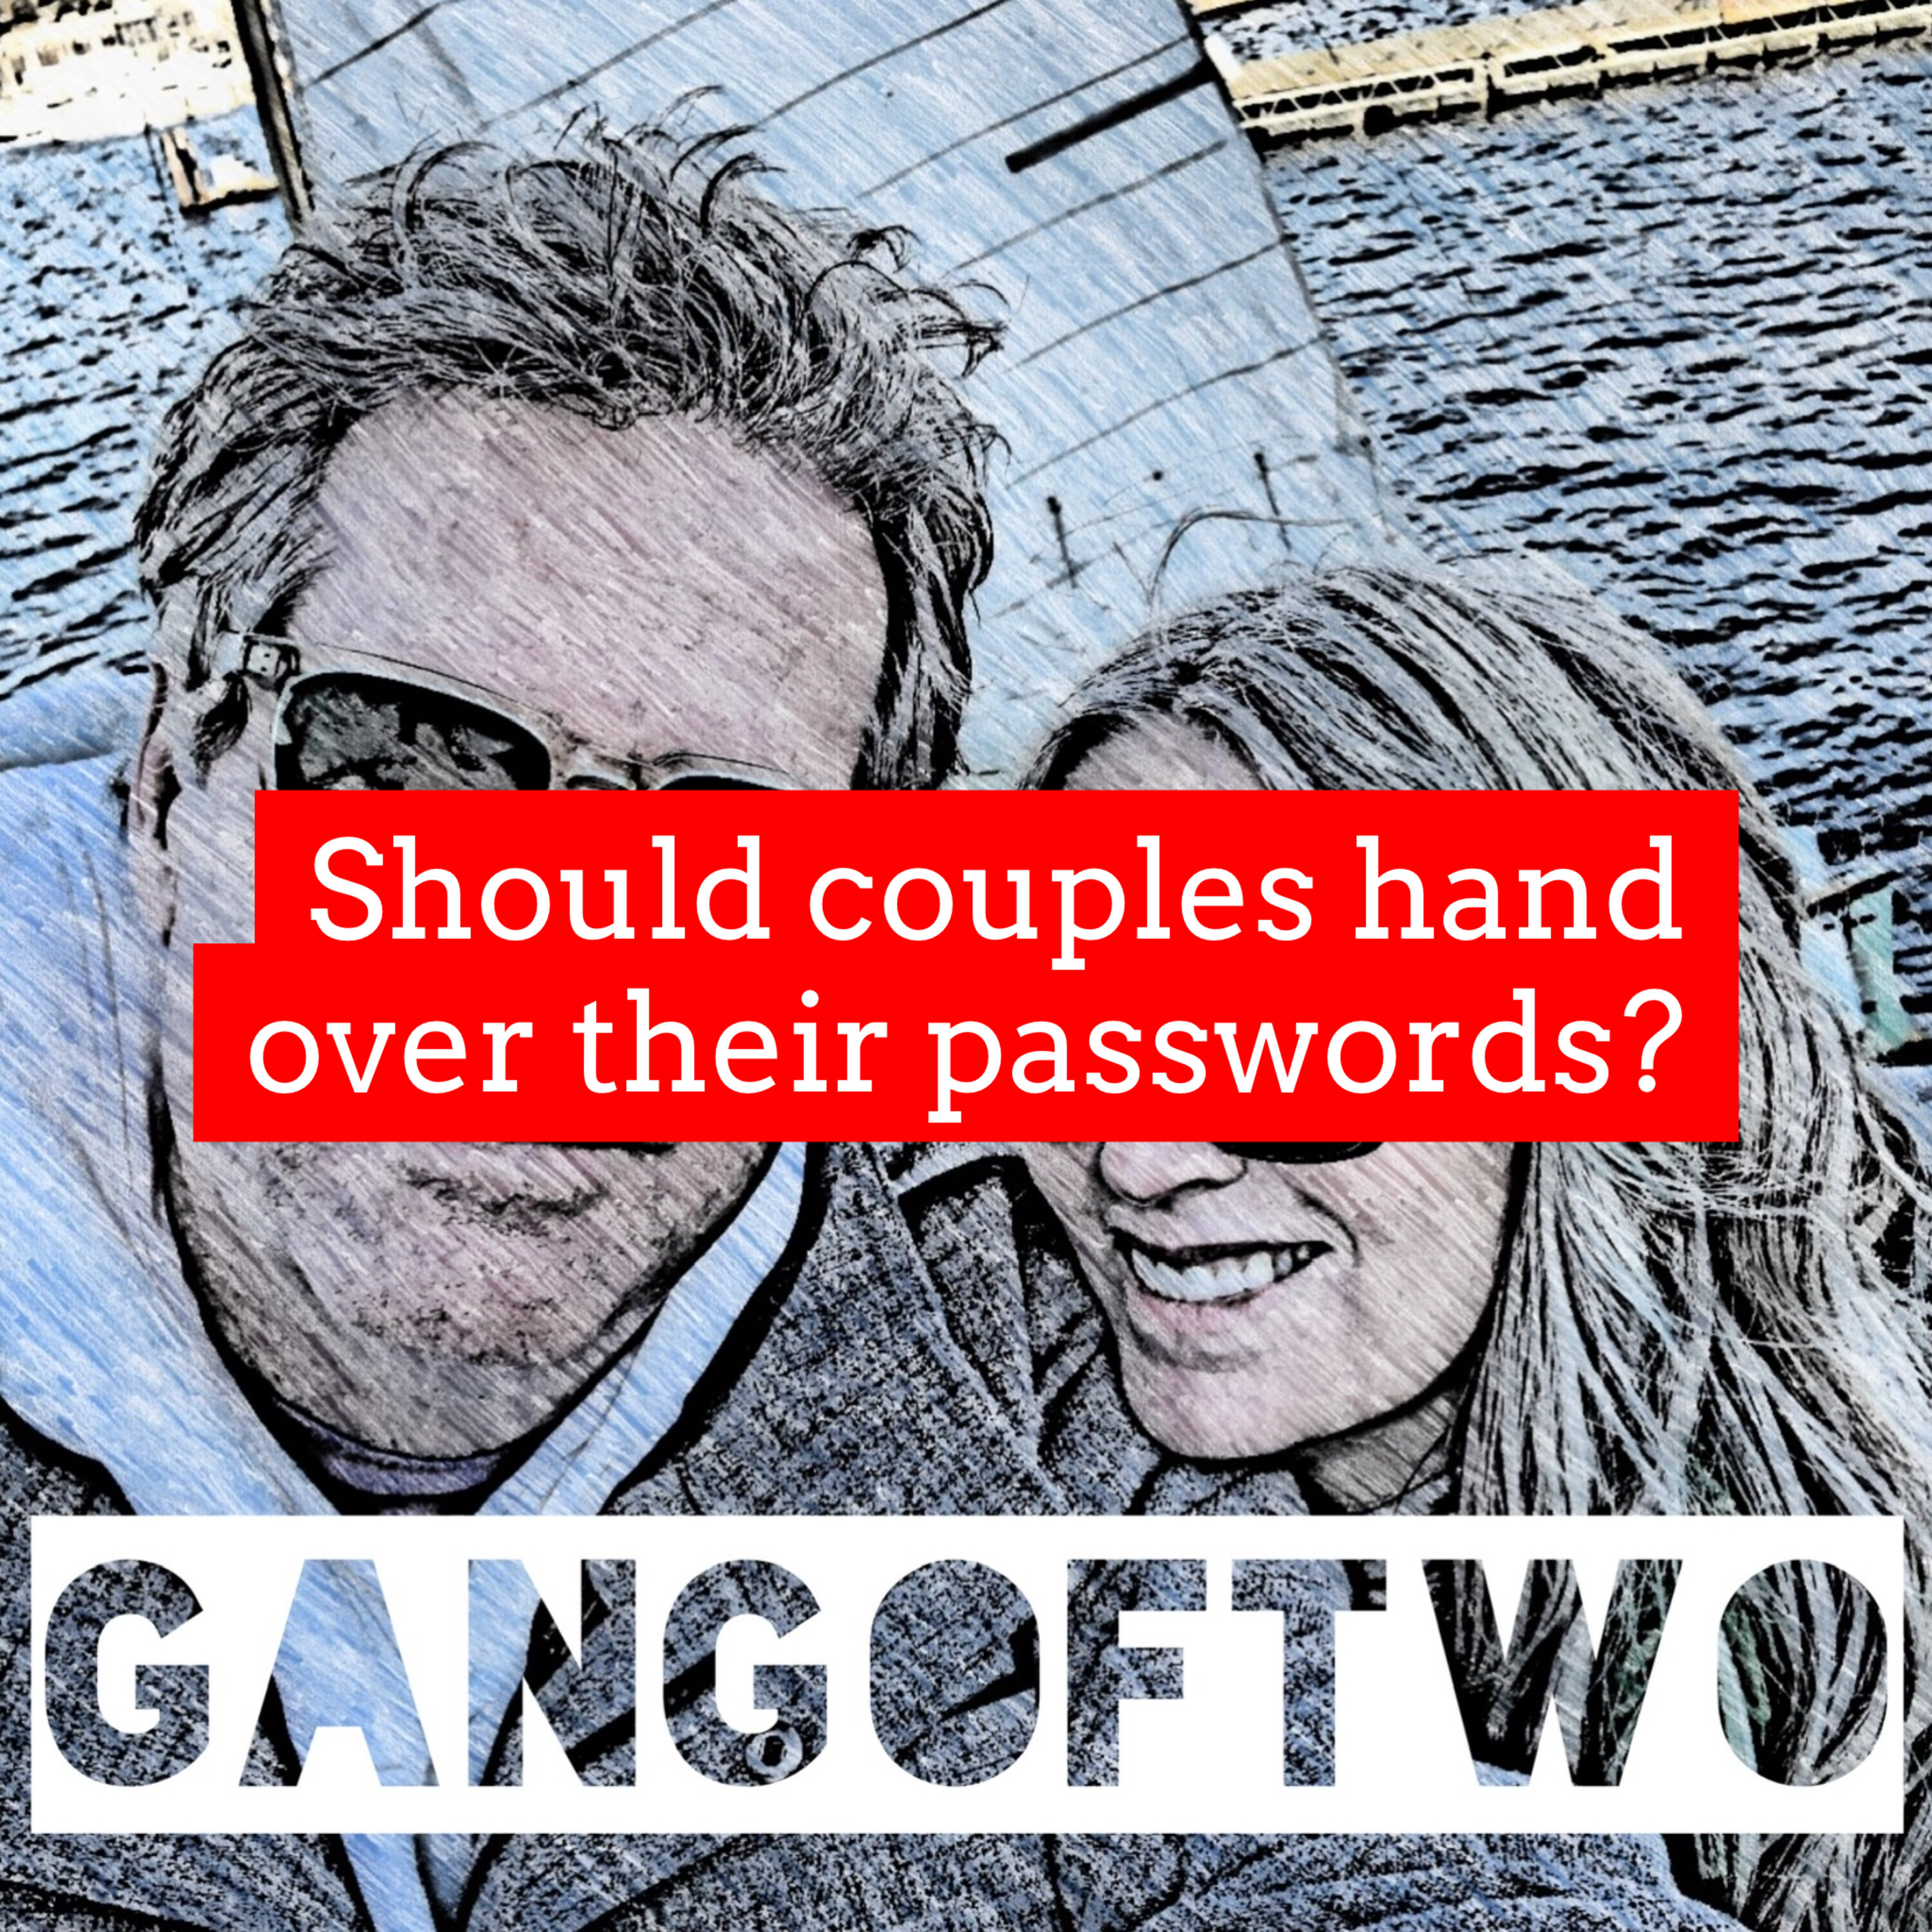 SHOULD COUPLES HAND OVER THEIR PASSWORDS? Image